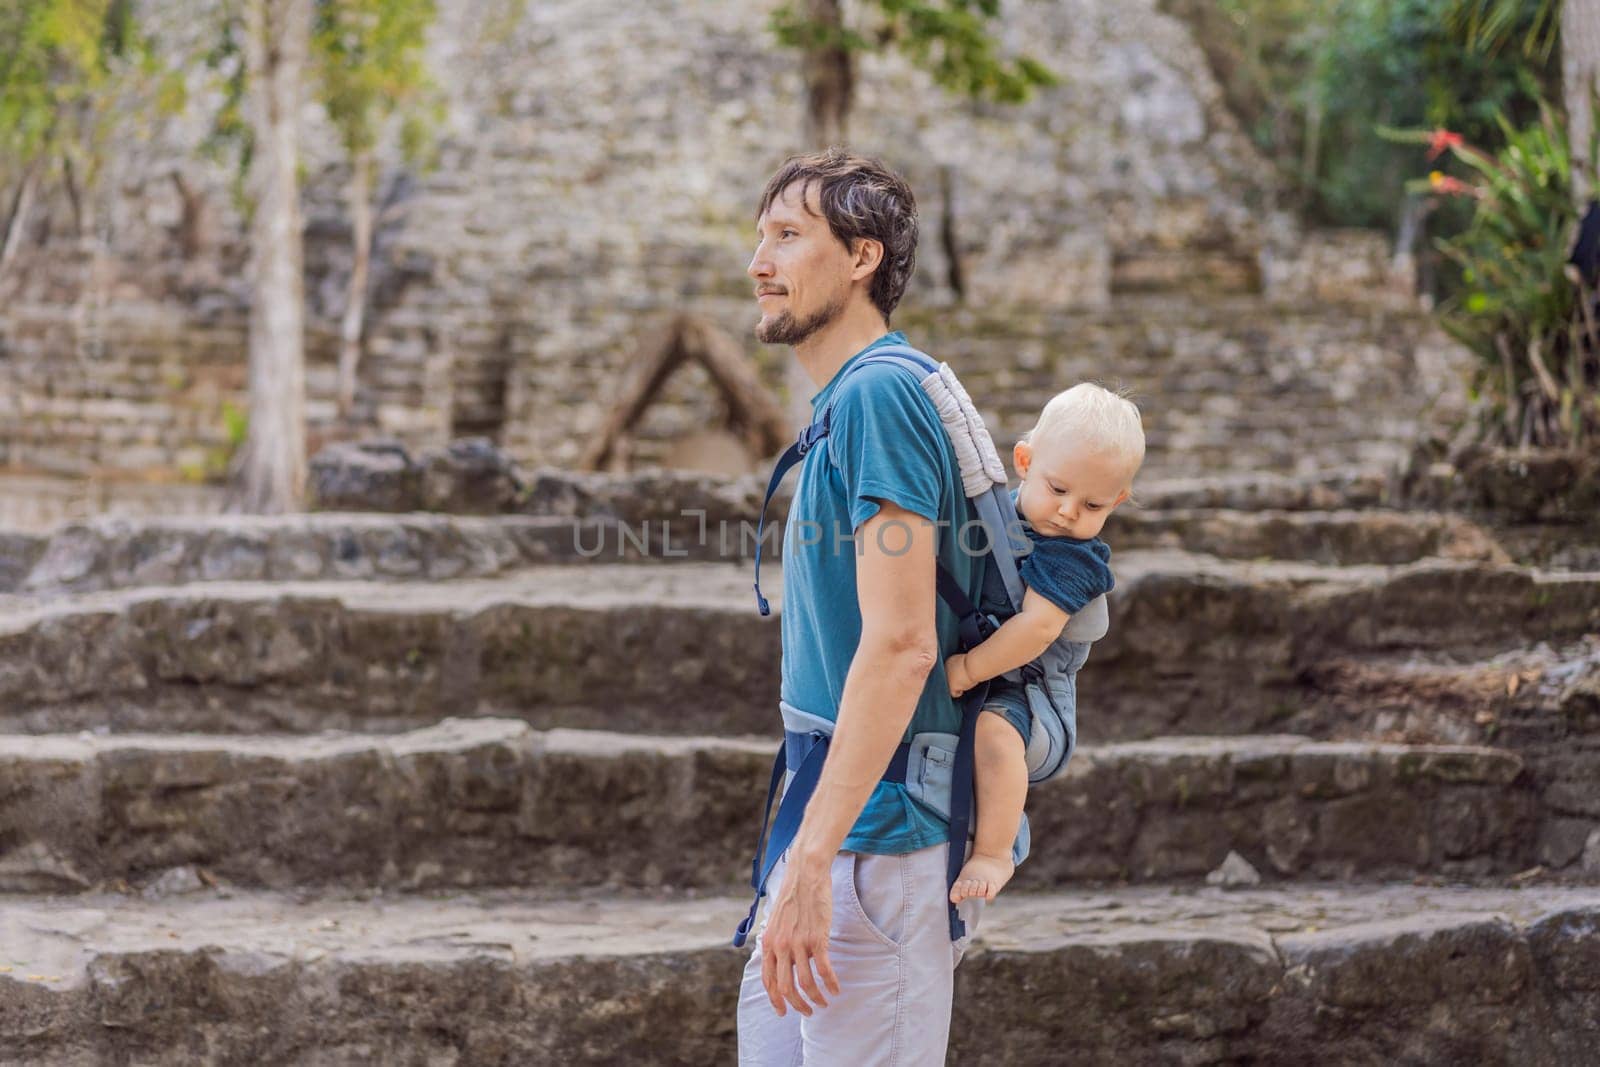 Dad and son tourists at Coba, Mexico. Ancient mayan city in Mexico. Coba is an archaeological area and a famous landmark of Yucatan Peninsula. Cloudy sky over a pyramid in Mexico.